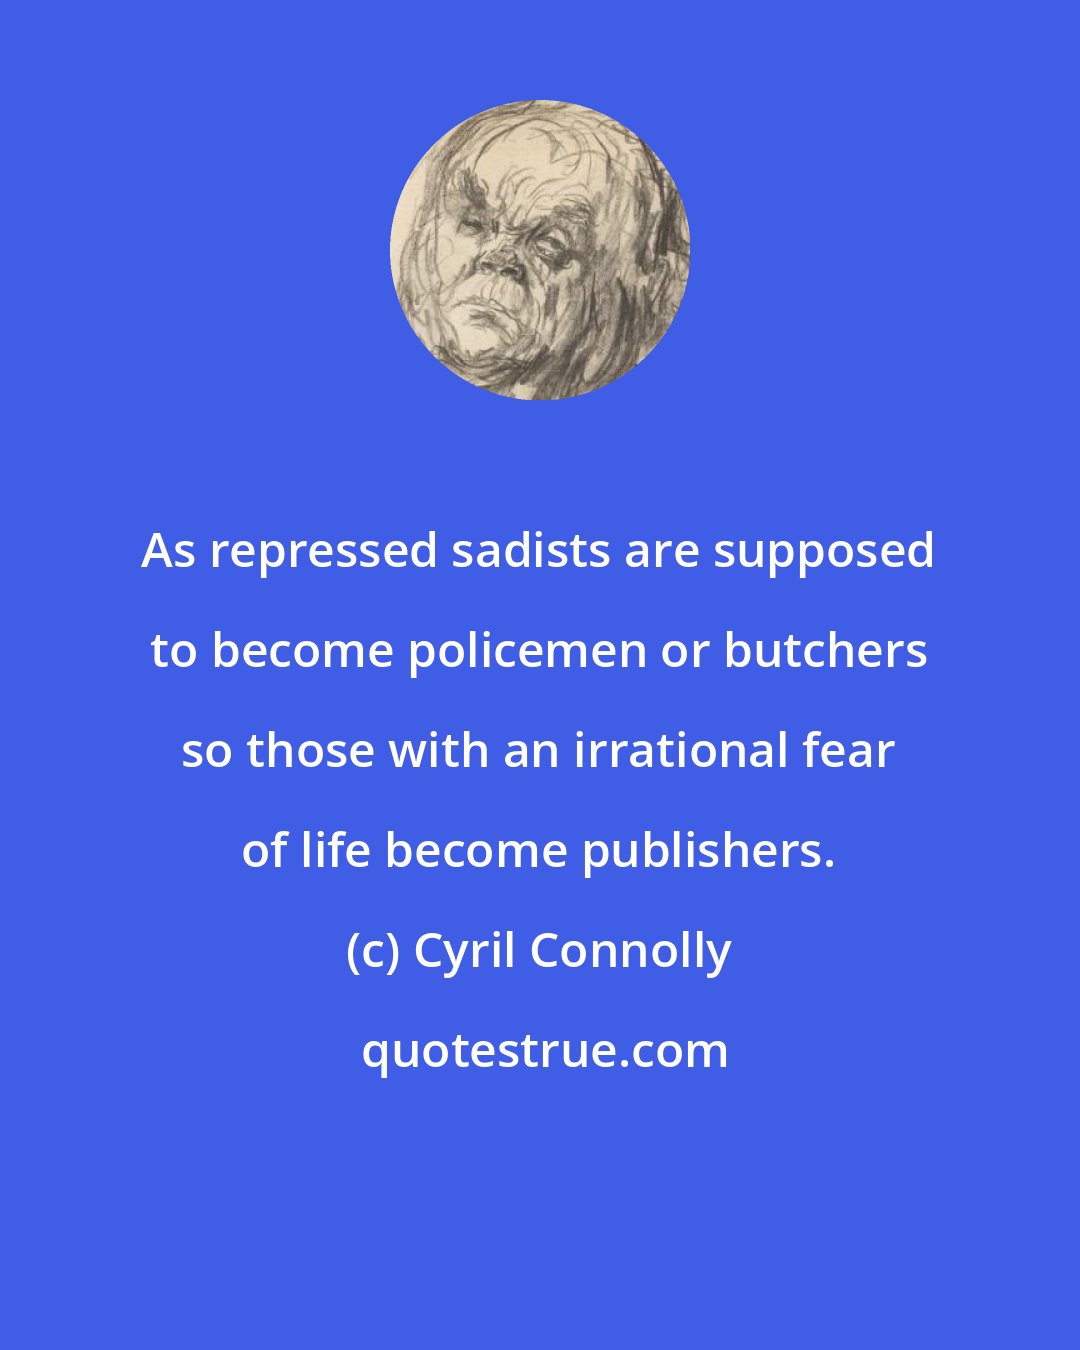 Cyril Connolly: As repressed sadists are supposed to become policemen or butchers so those with an irrational fear of life become publishers.